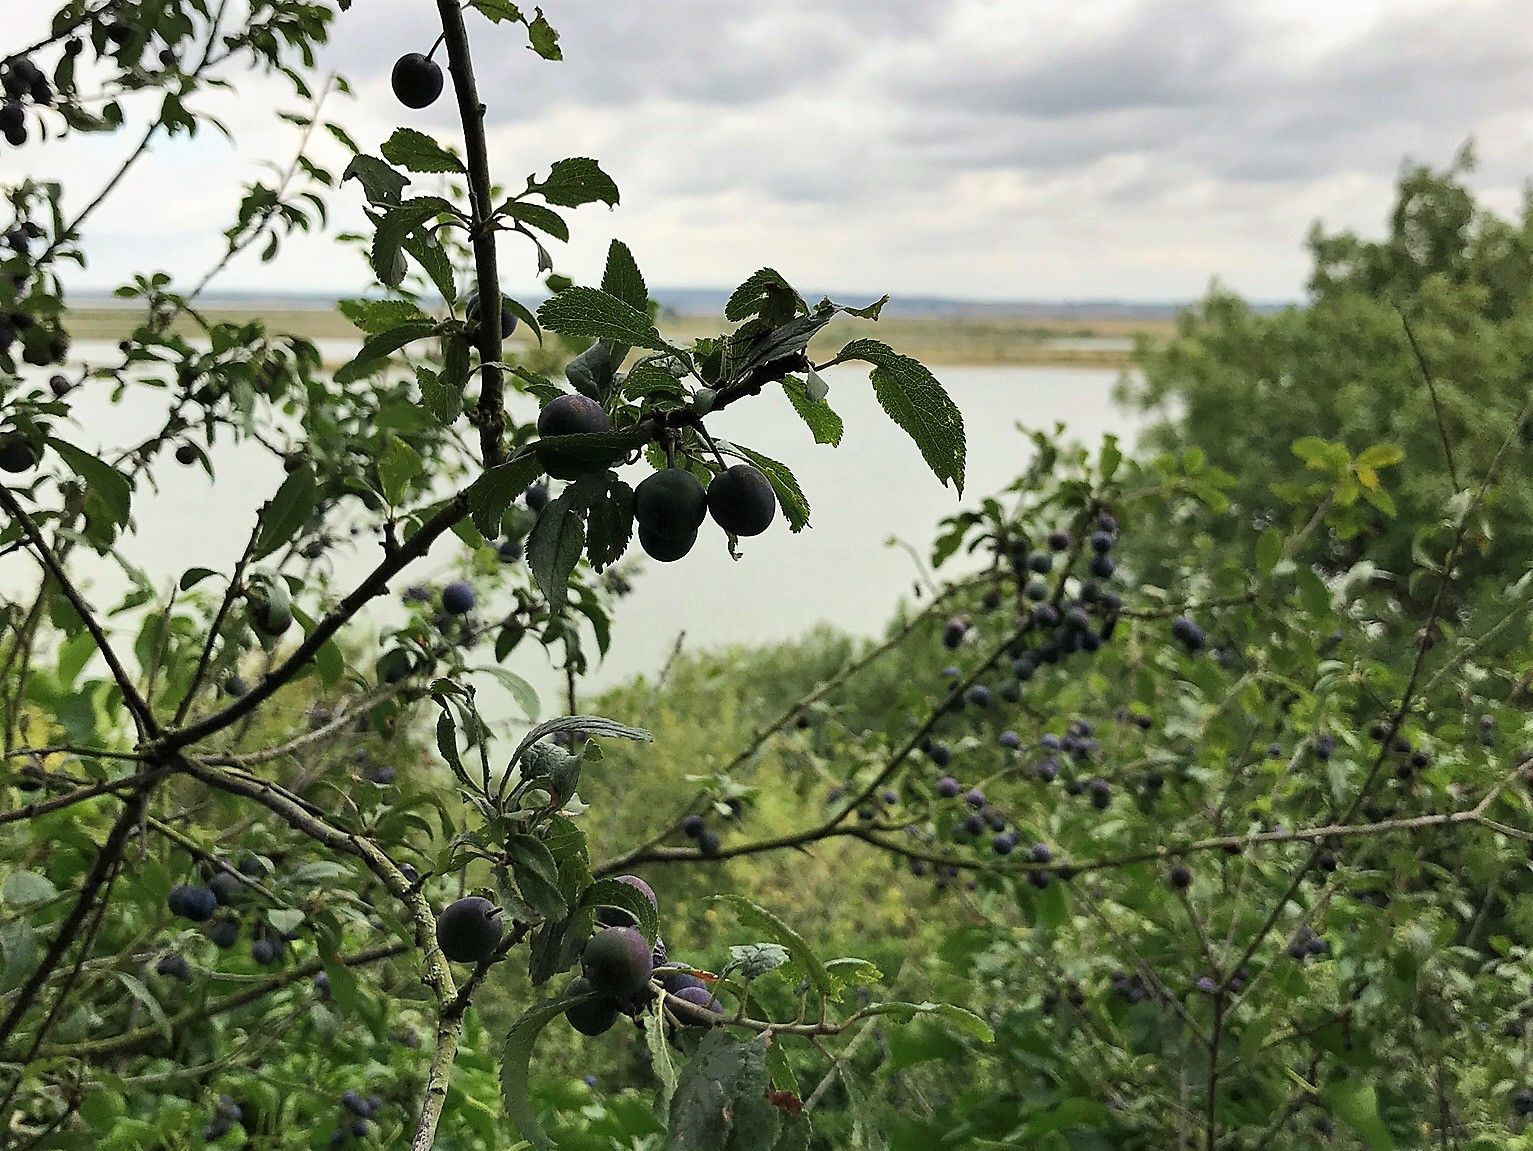 View of the pools at cliffe marshes through a damson tree.